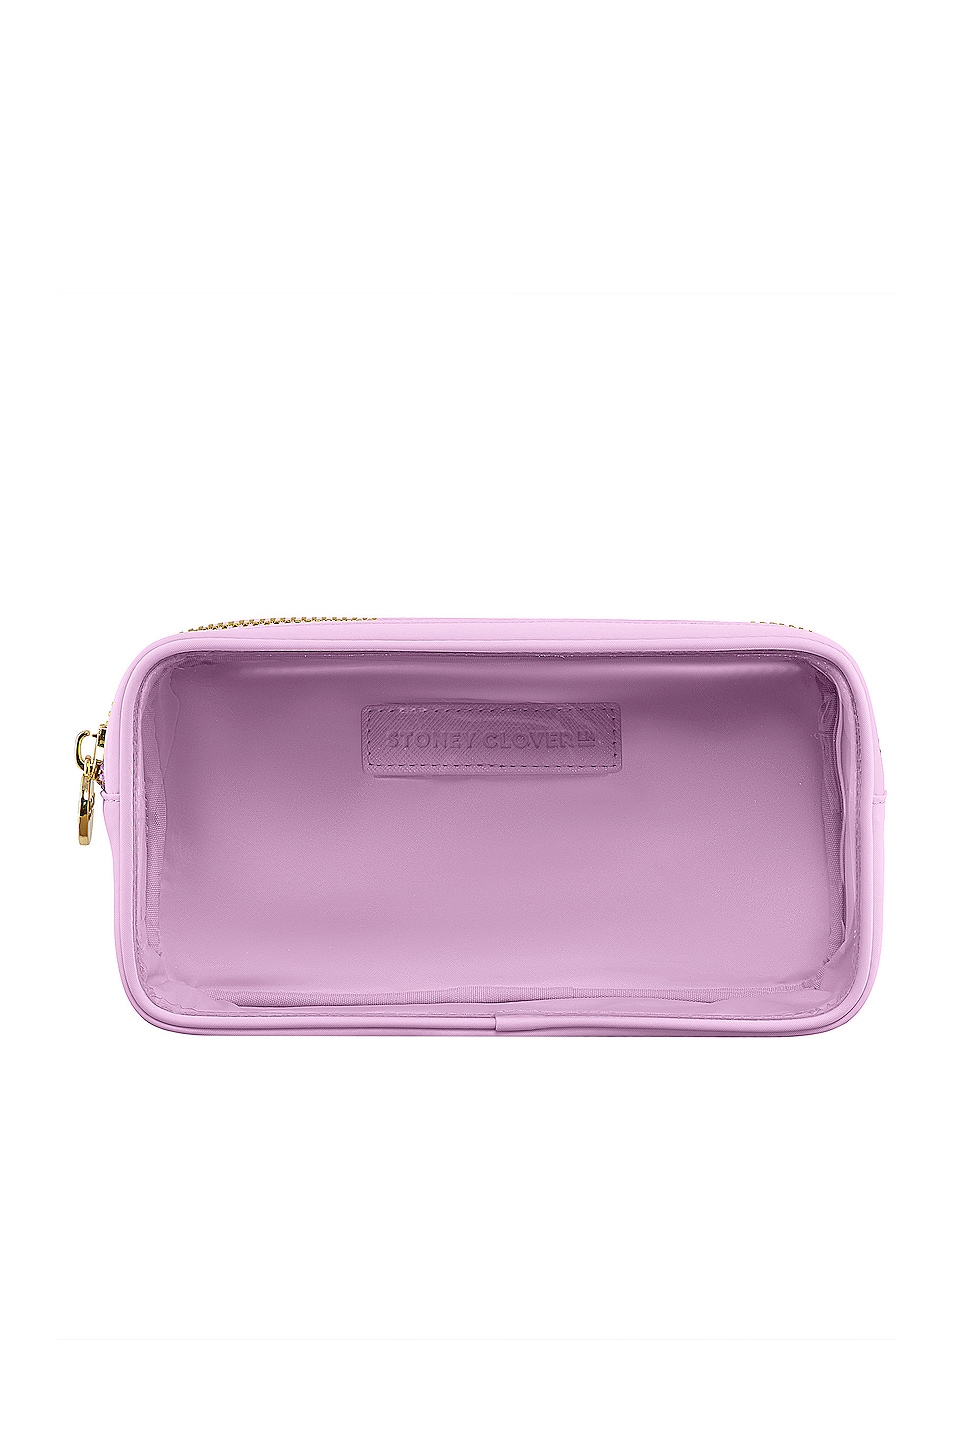 Stoney Clover Lane Clear Front Small Pouch in Grape